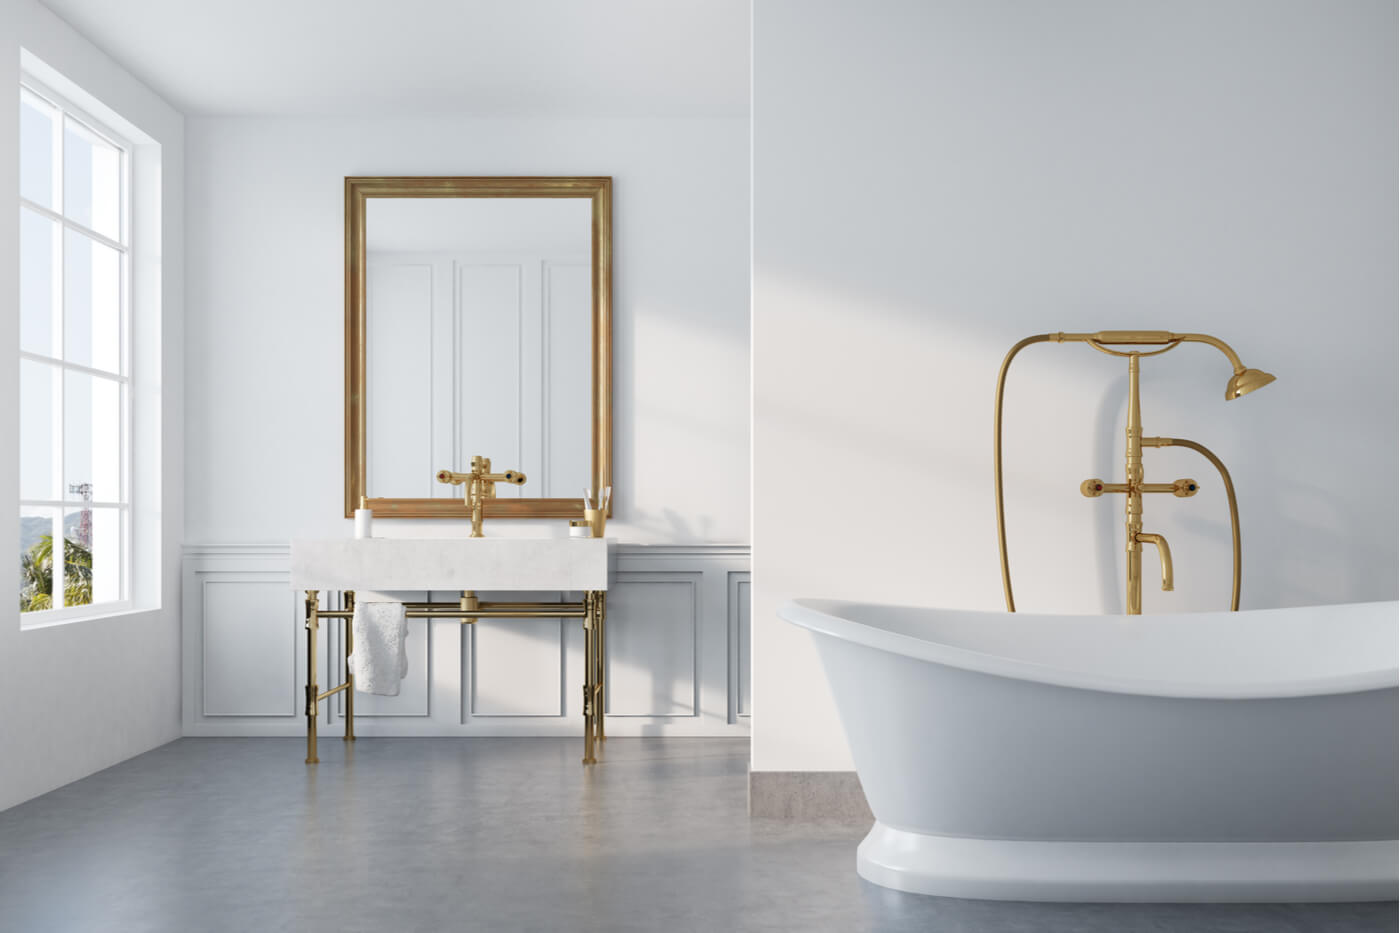 Your bathrooms will love the gold